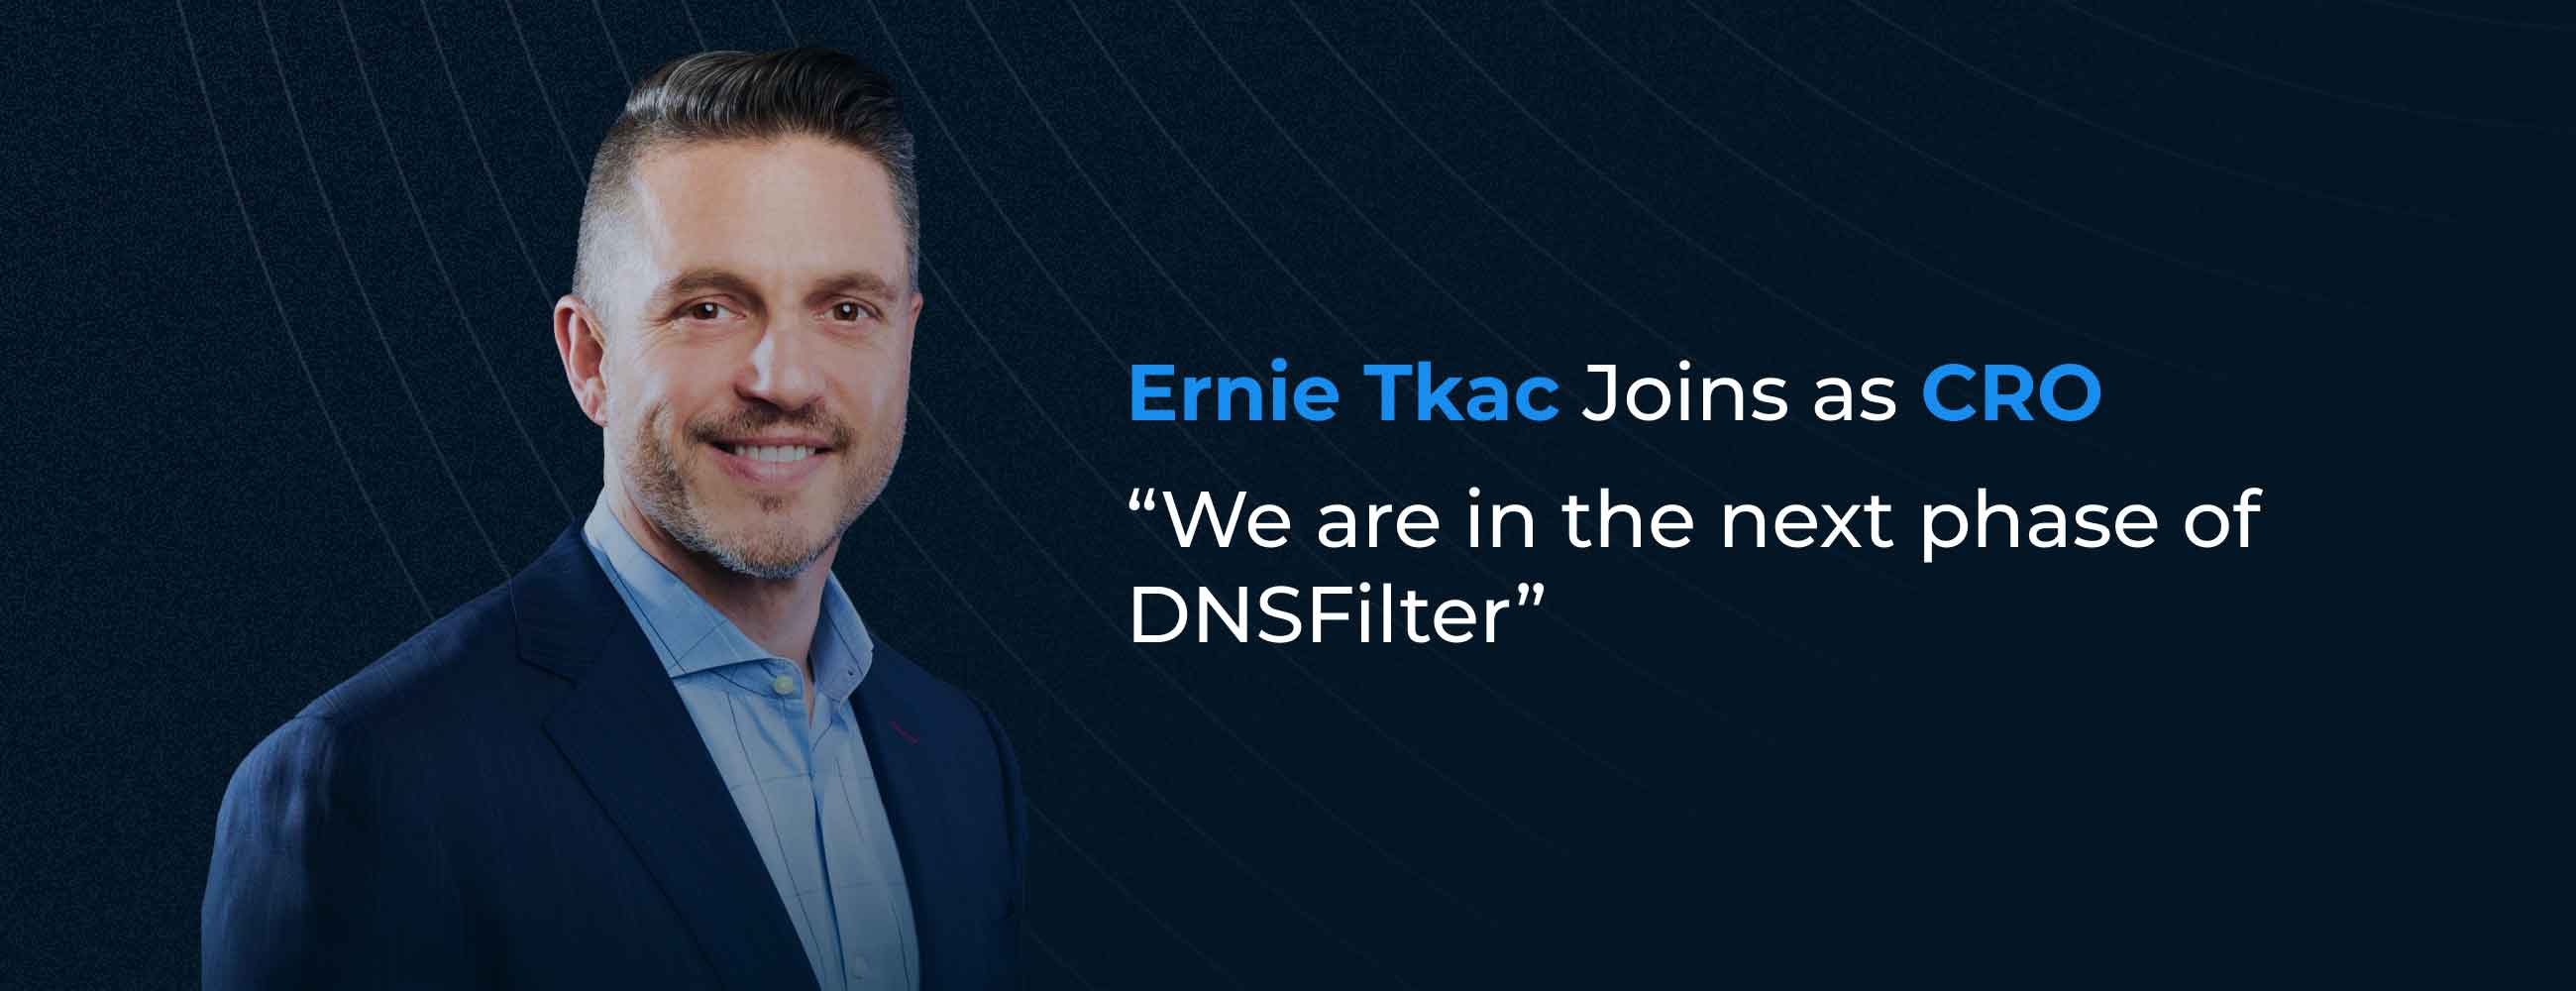 Ernie Tkac Joins as CRO: “We are in the next phase of DNSFilter”